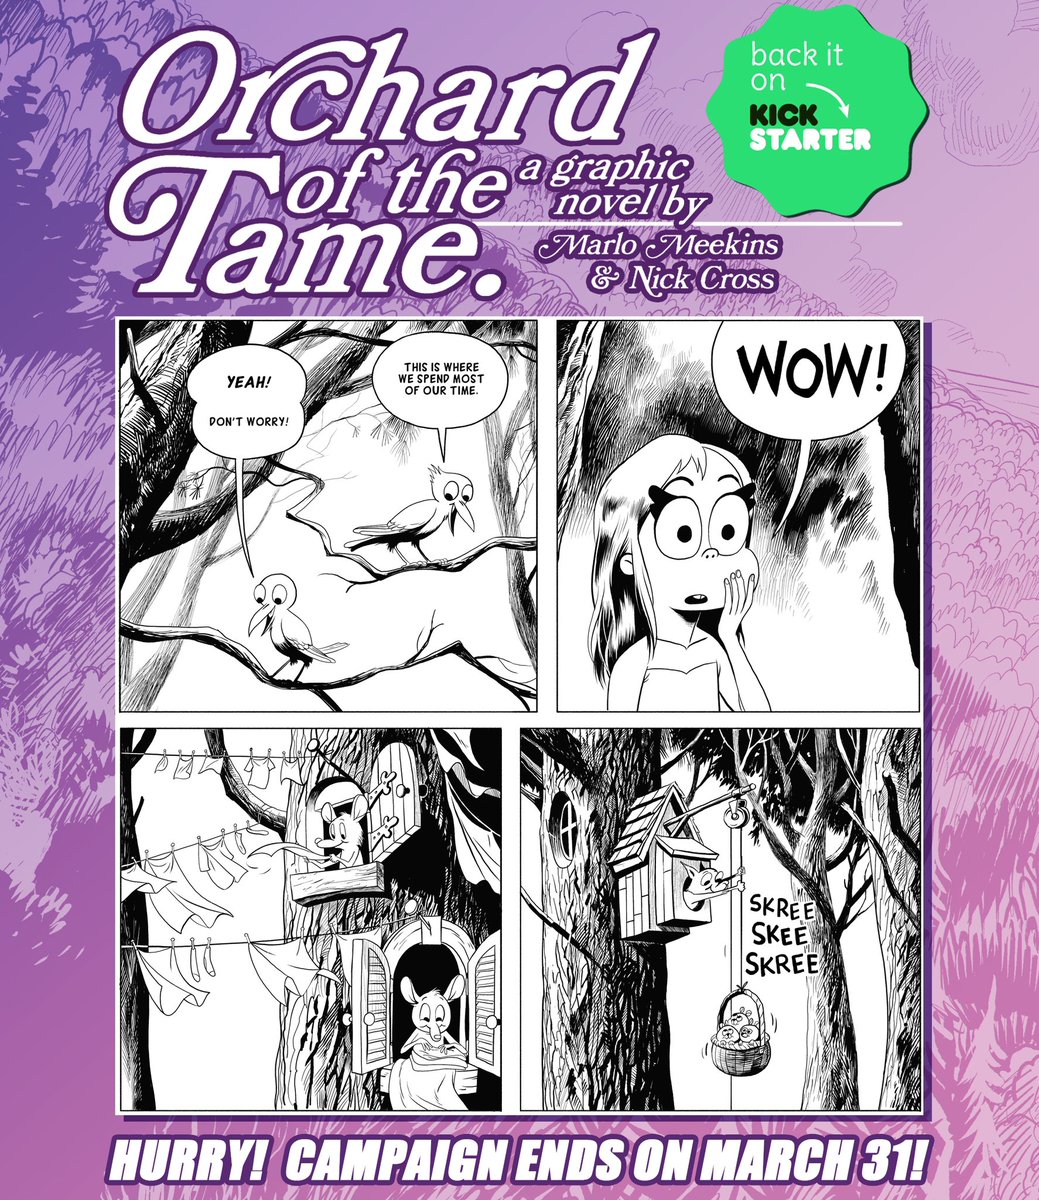 Time is running short to get your pledges in for ORCHARD OF THE TAME! Grab this fabulous graphic novel while you can! Link in bio. . #orchardofthetame #nickcross #marlomeekins #graphicnovel #smallpress #smallpressbooks #novels #graphicnovels #indybooks #fairytale #fantasy